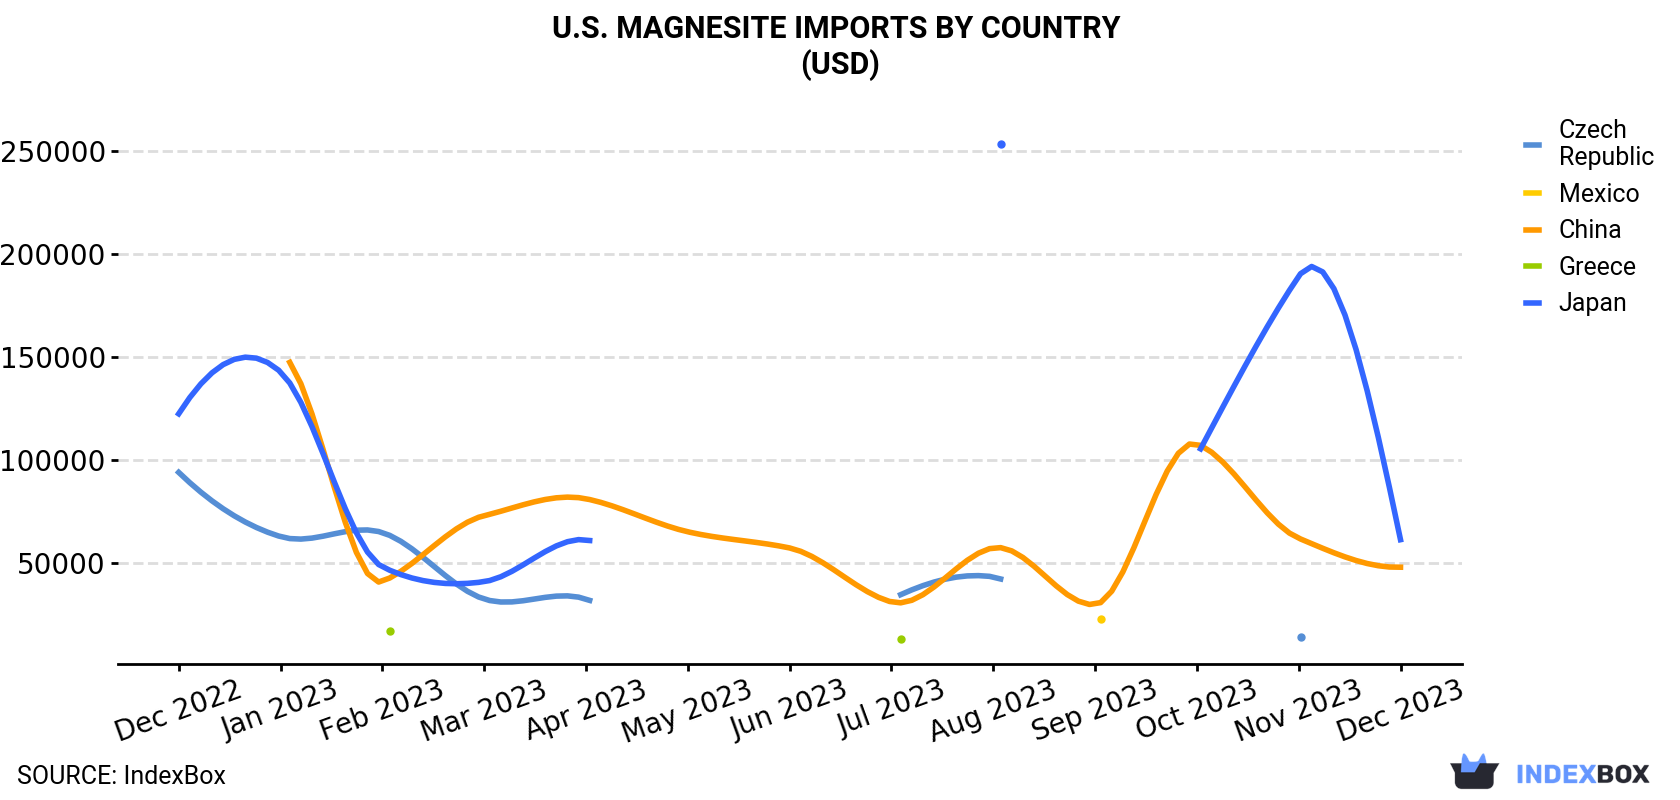 U.S. Magnesite Imports By Country (USD)